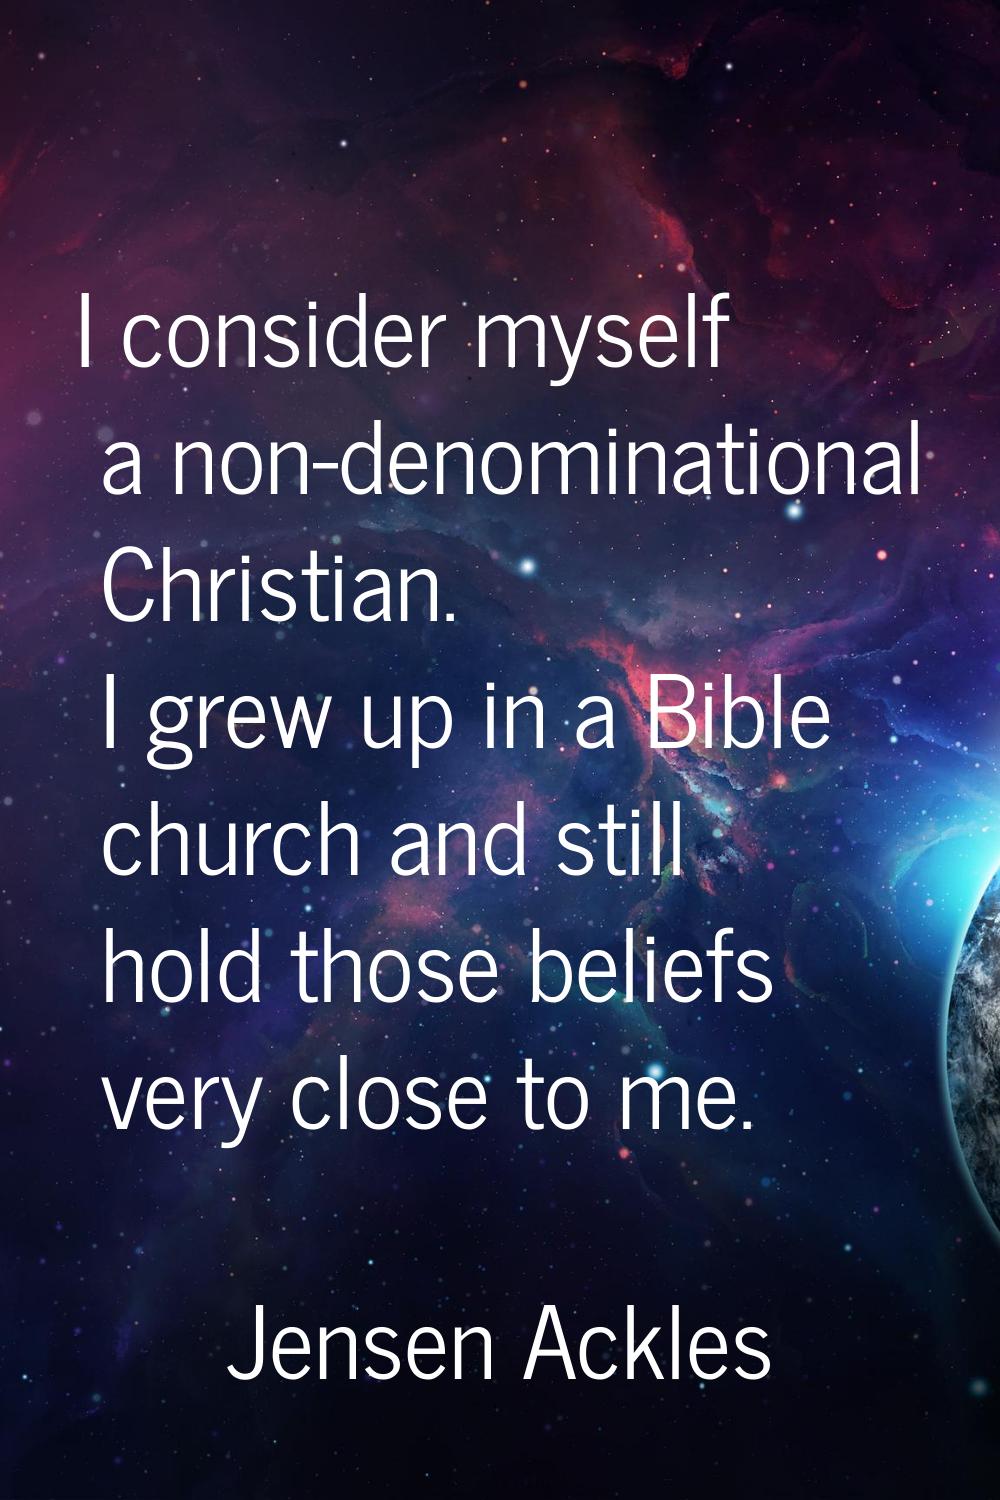 I consider myself a non-denominational Christian. I grew up in a Bible church and still hold those 